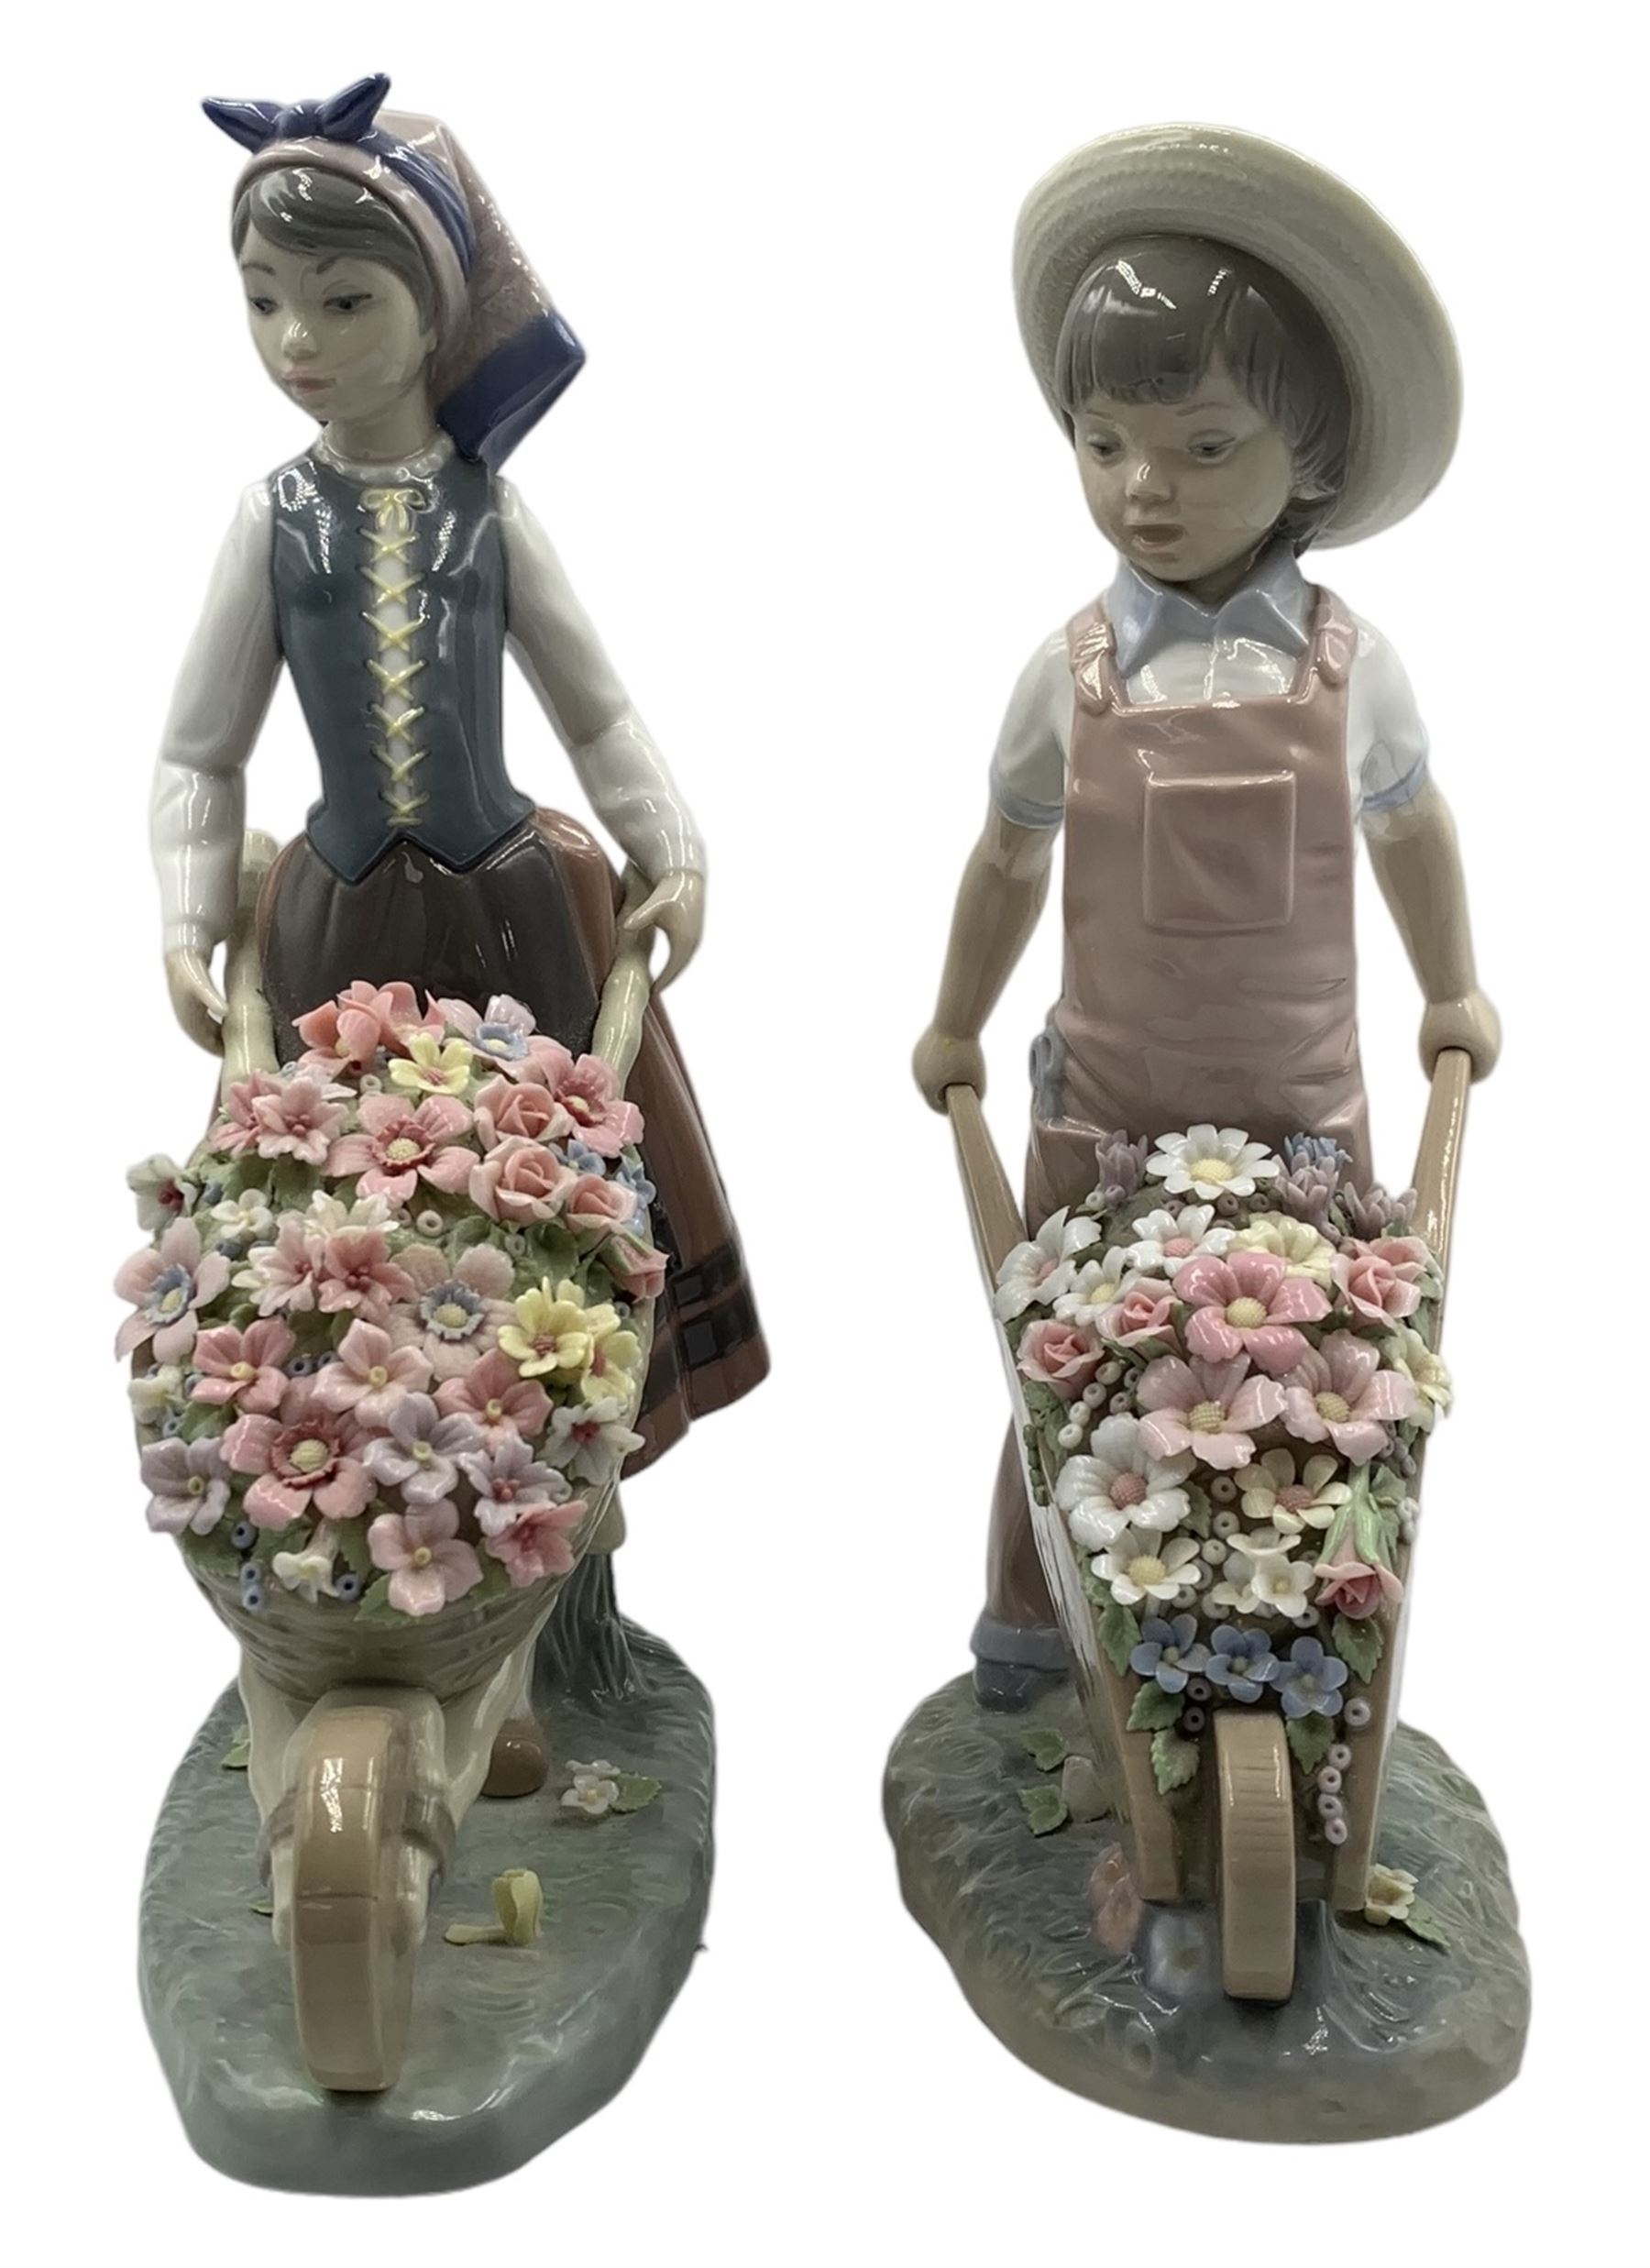 Lladro figure 'A barrel of Blossoms' No.1419 and another 'Little Gardener' No.1283 (2) - Image 6 of 6